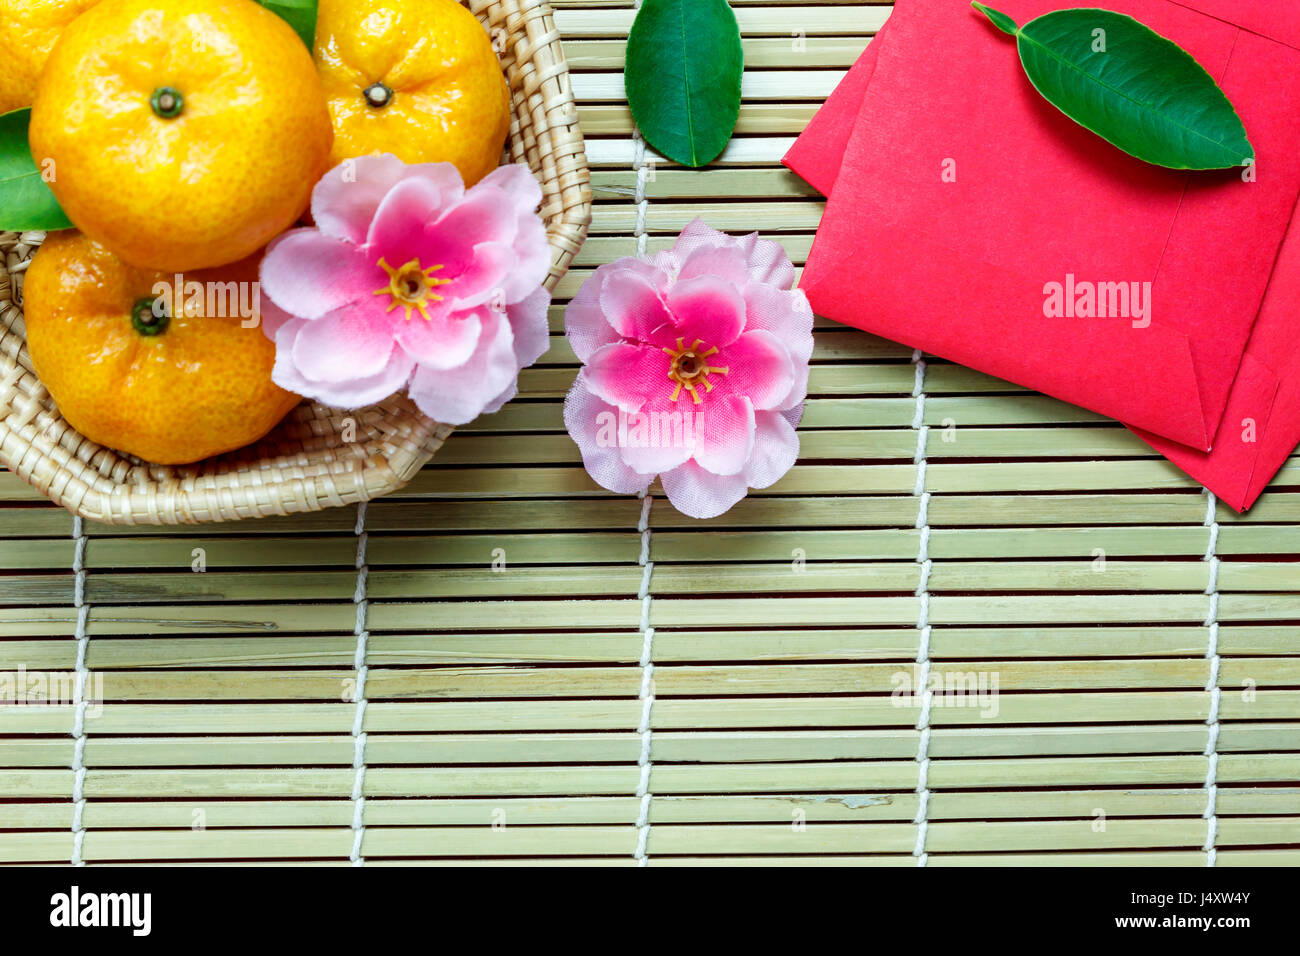 Top view  accessories Chinese new year festival decorations.orange,leaf,wood basket,red packet,plum blossom on bamboo background with copy space. Stock Photo